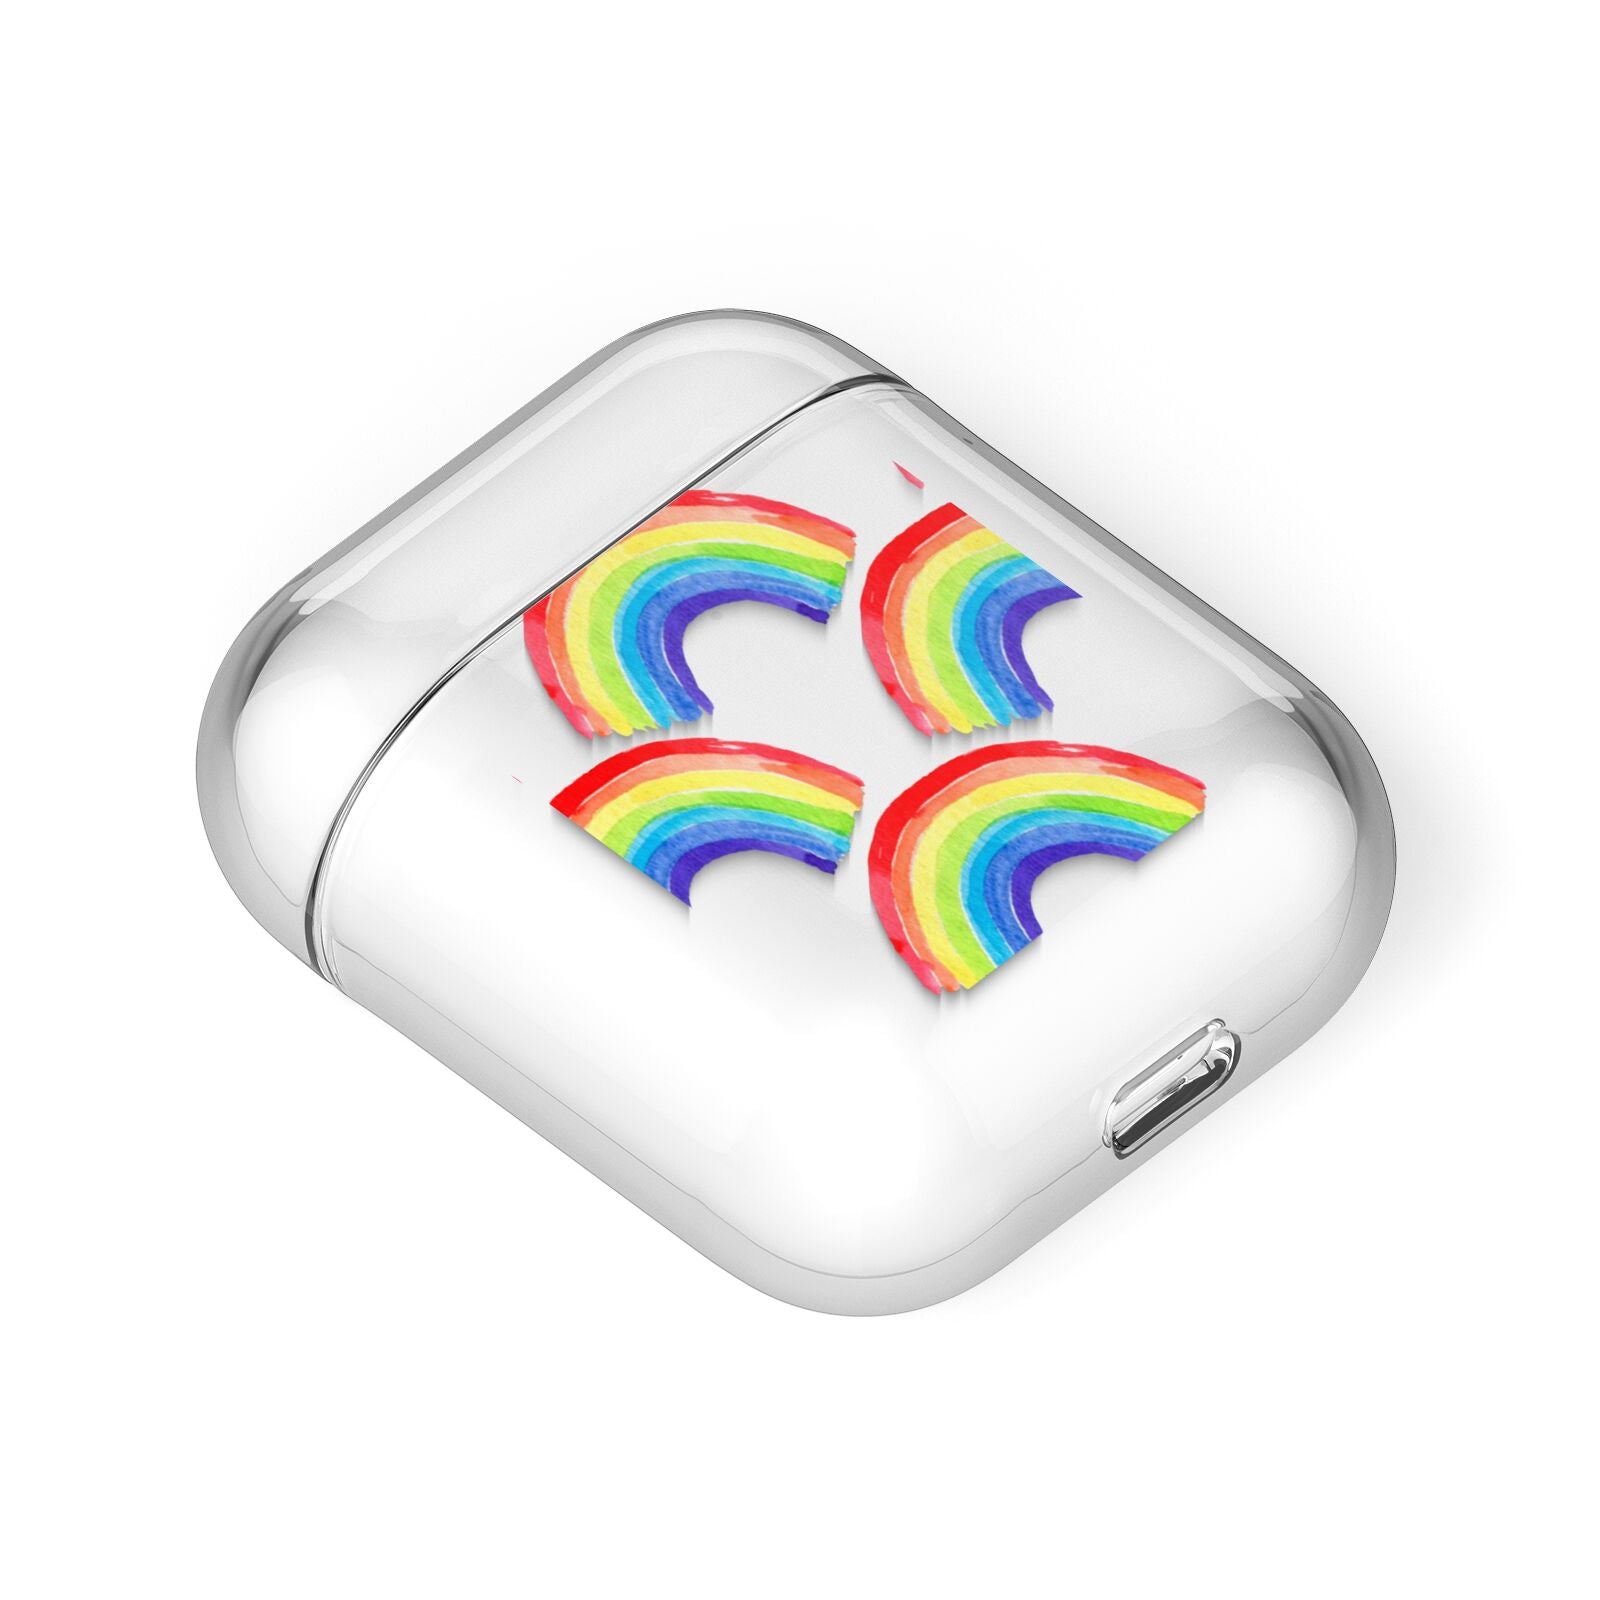 Rainbow AirPods Case Laid Flat